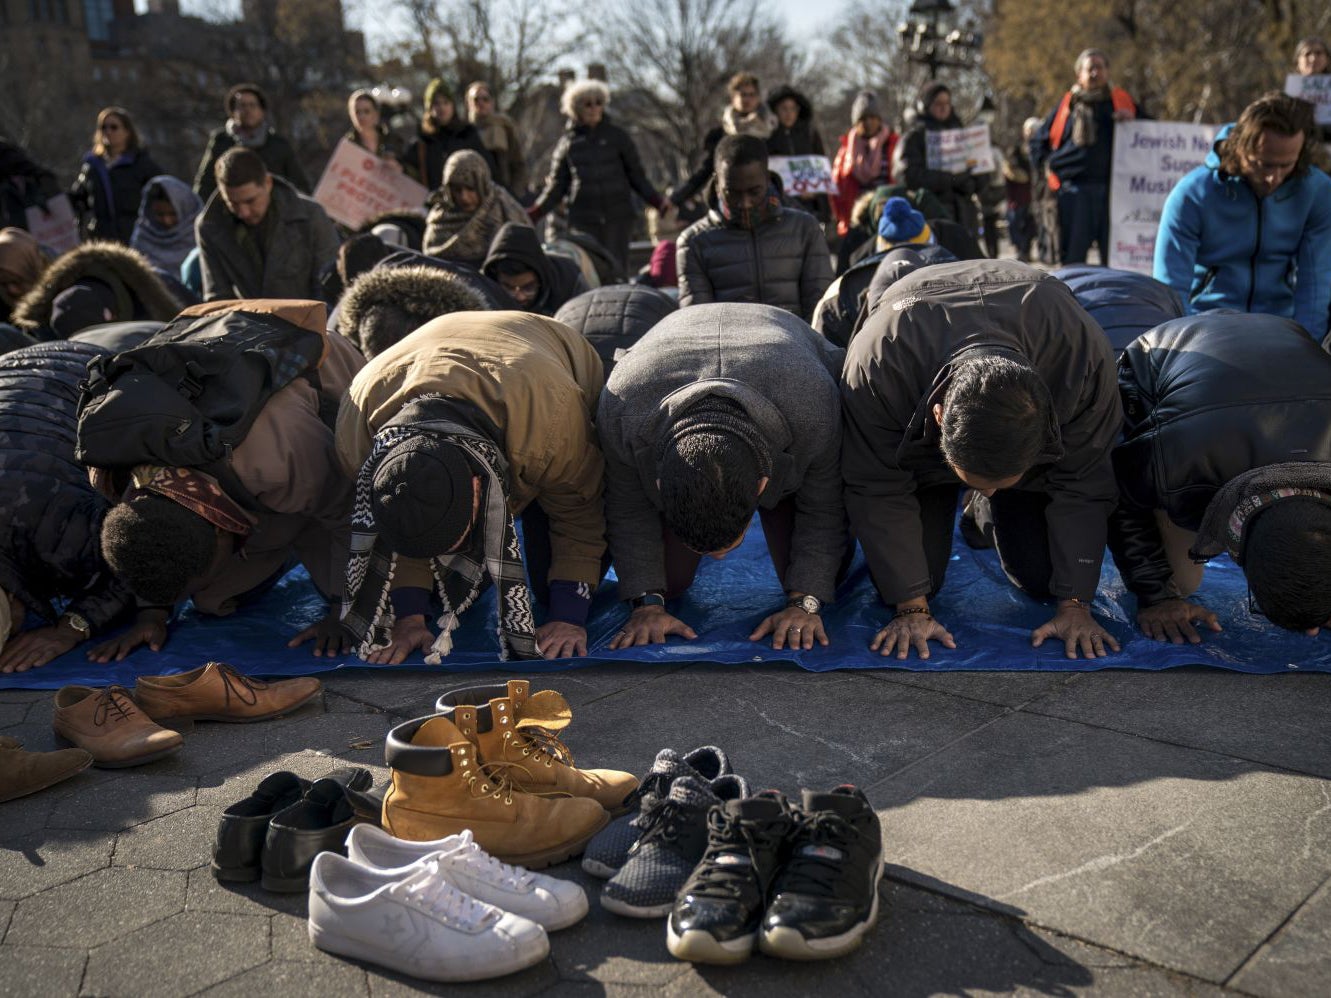 Muslims pray following a protest to the mark the one year anniversary of the Trump administration's executive order banning travel into the United States from several Muslim majority countries, in Washington Square Park, 26 January, 2018 in New York City. After numerous legal challenges, the travel ban is now in its third iteration. The Supreme Court is scheduled to hear the 'Trump v Hawaii' case concerning the travel ban this spring